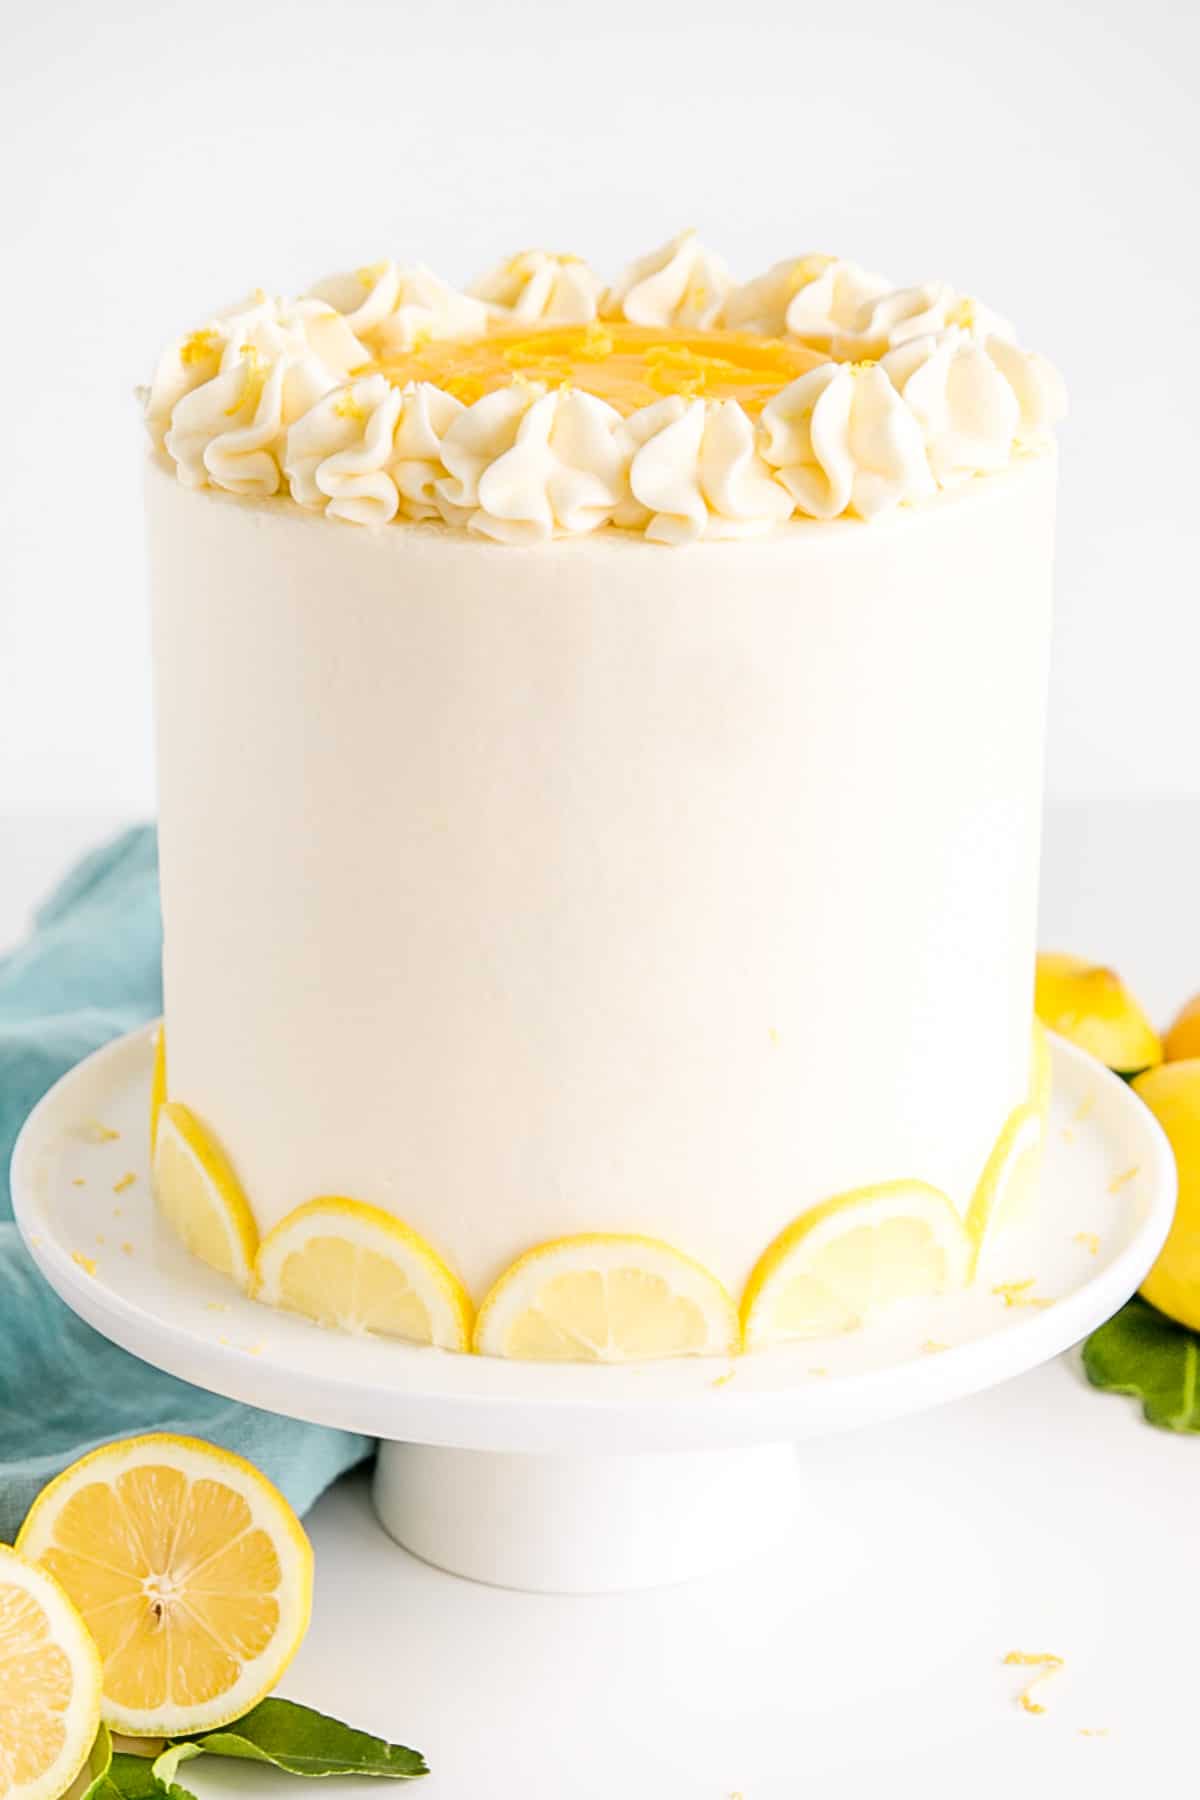 Cake on a white cake stand with lemons in the foreground.